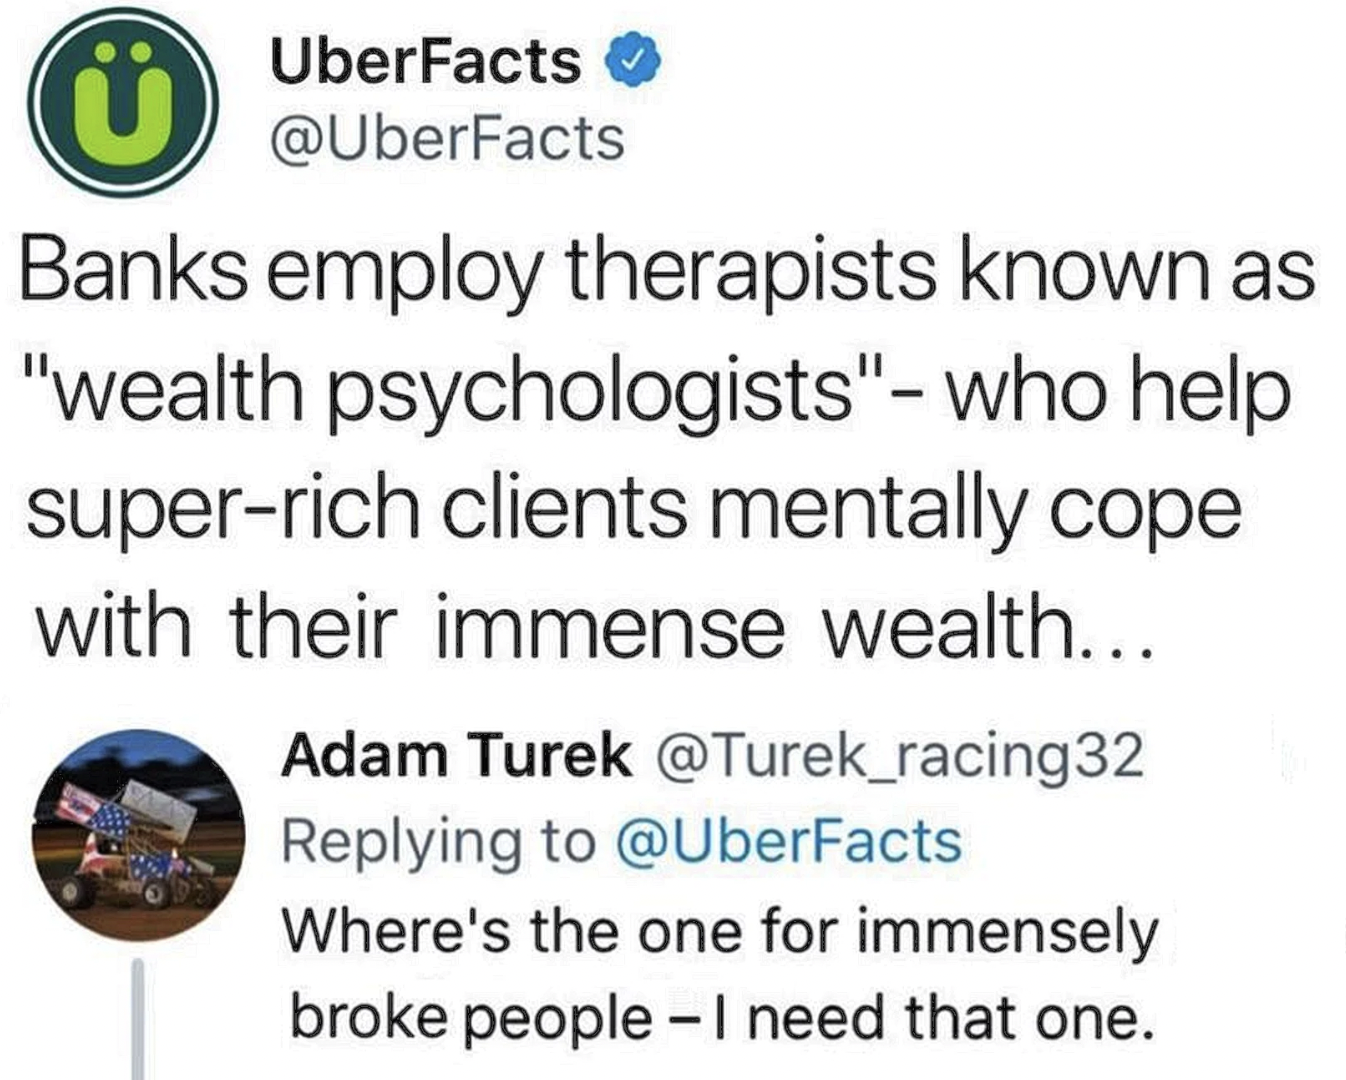 paper - UberFacts Banks employ therapists known as "wealth psychologists" who help superrich clients mentally cope with their immense wealth... Adam Turek Where's the one for immensely broke people I need that one.